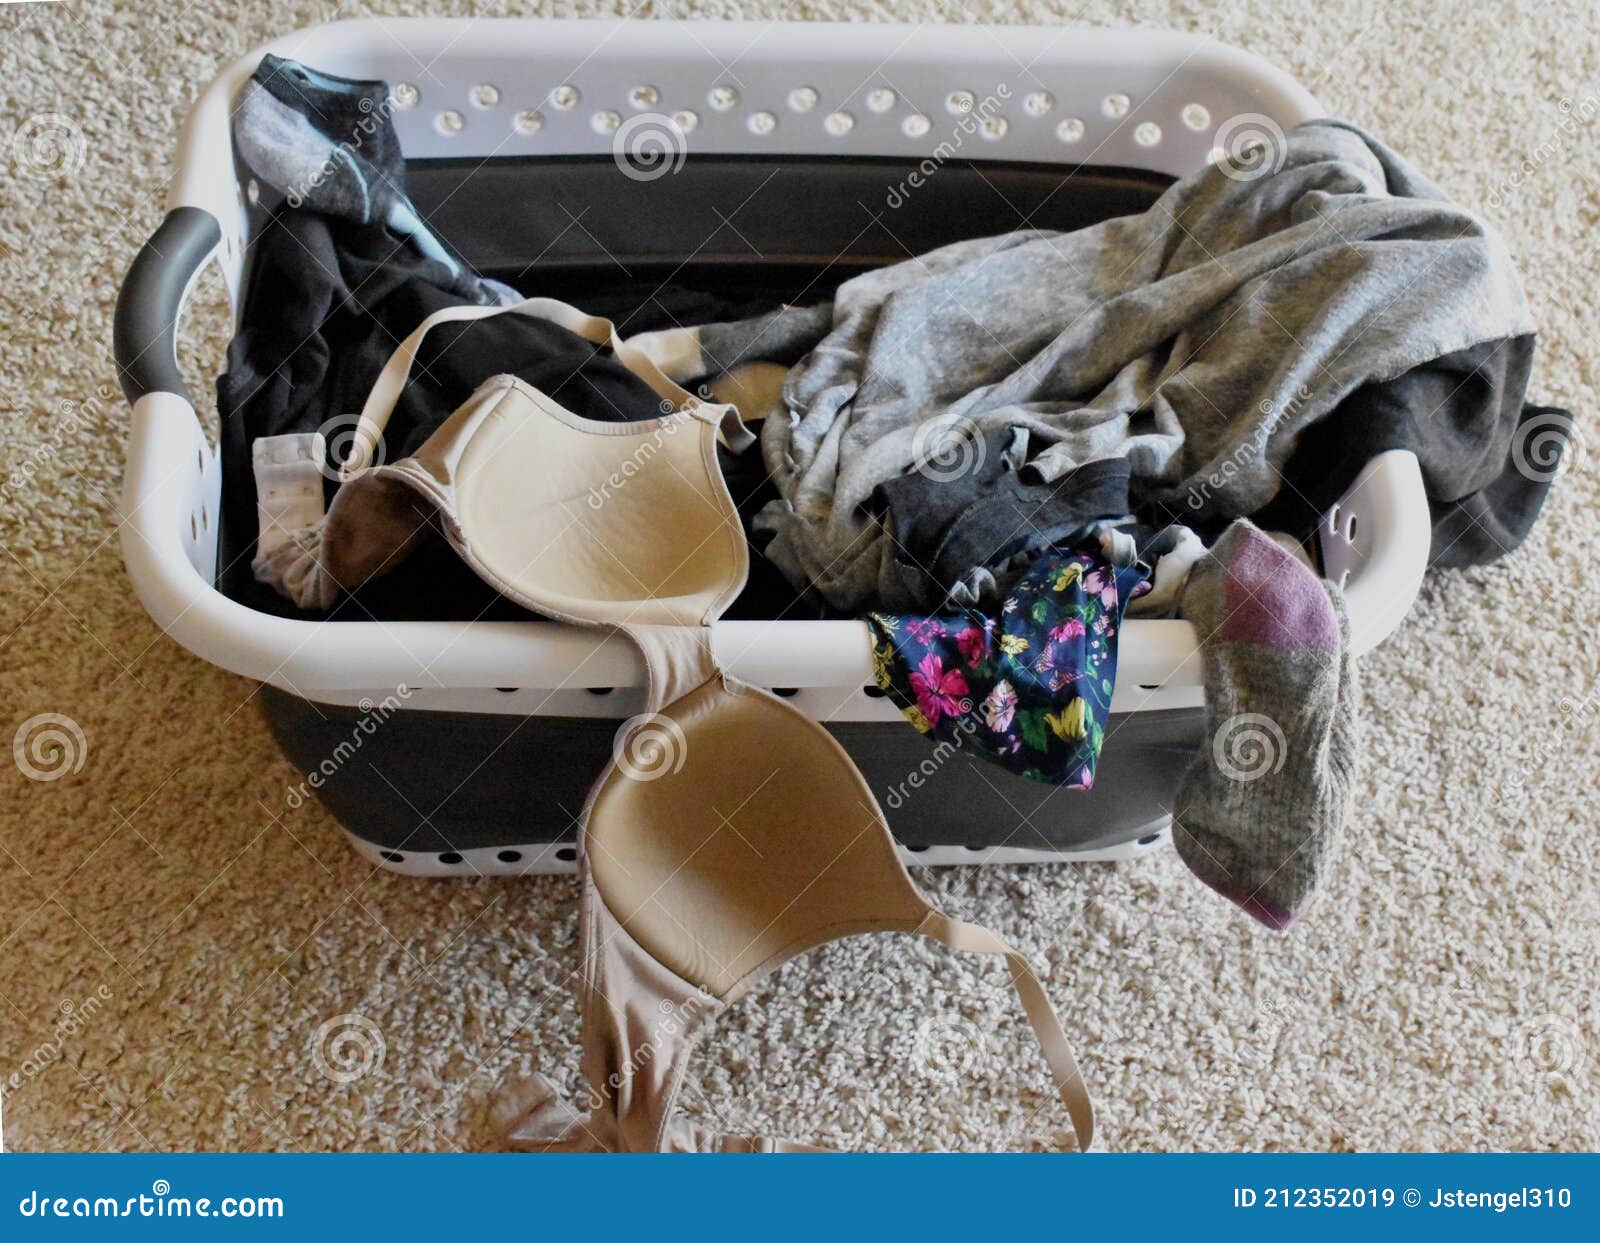 Dirty Women`s Laundry in Basket Stock Image - Image of chores